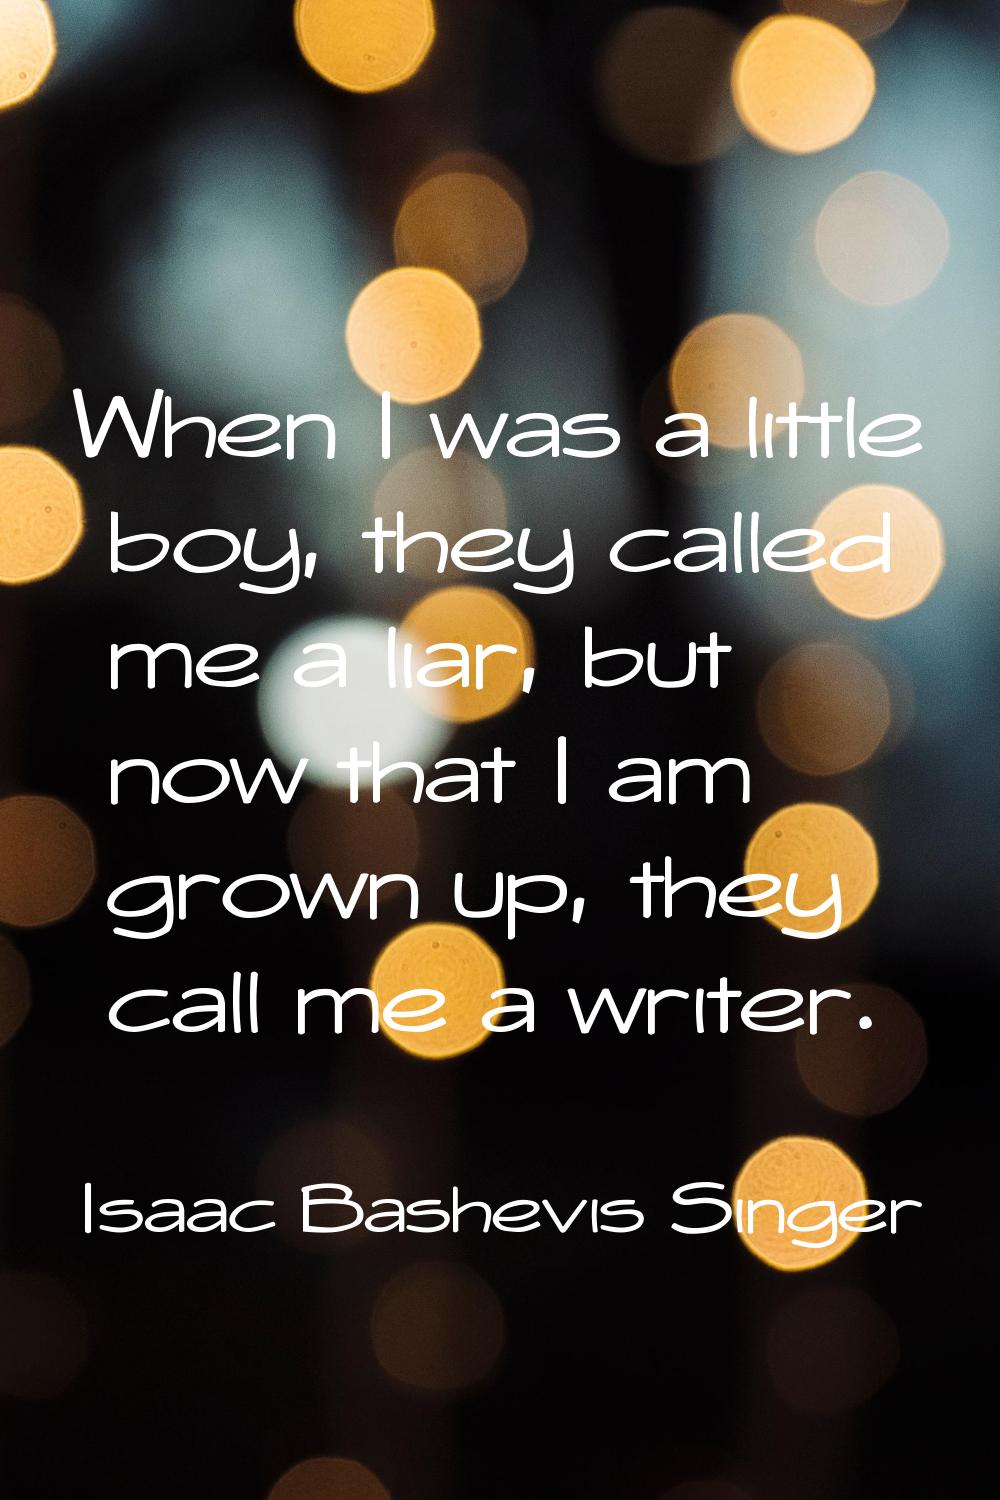 When I was a little boy, they called me a liar, but now that I am grown up, they call me a writer.